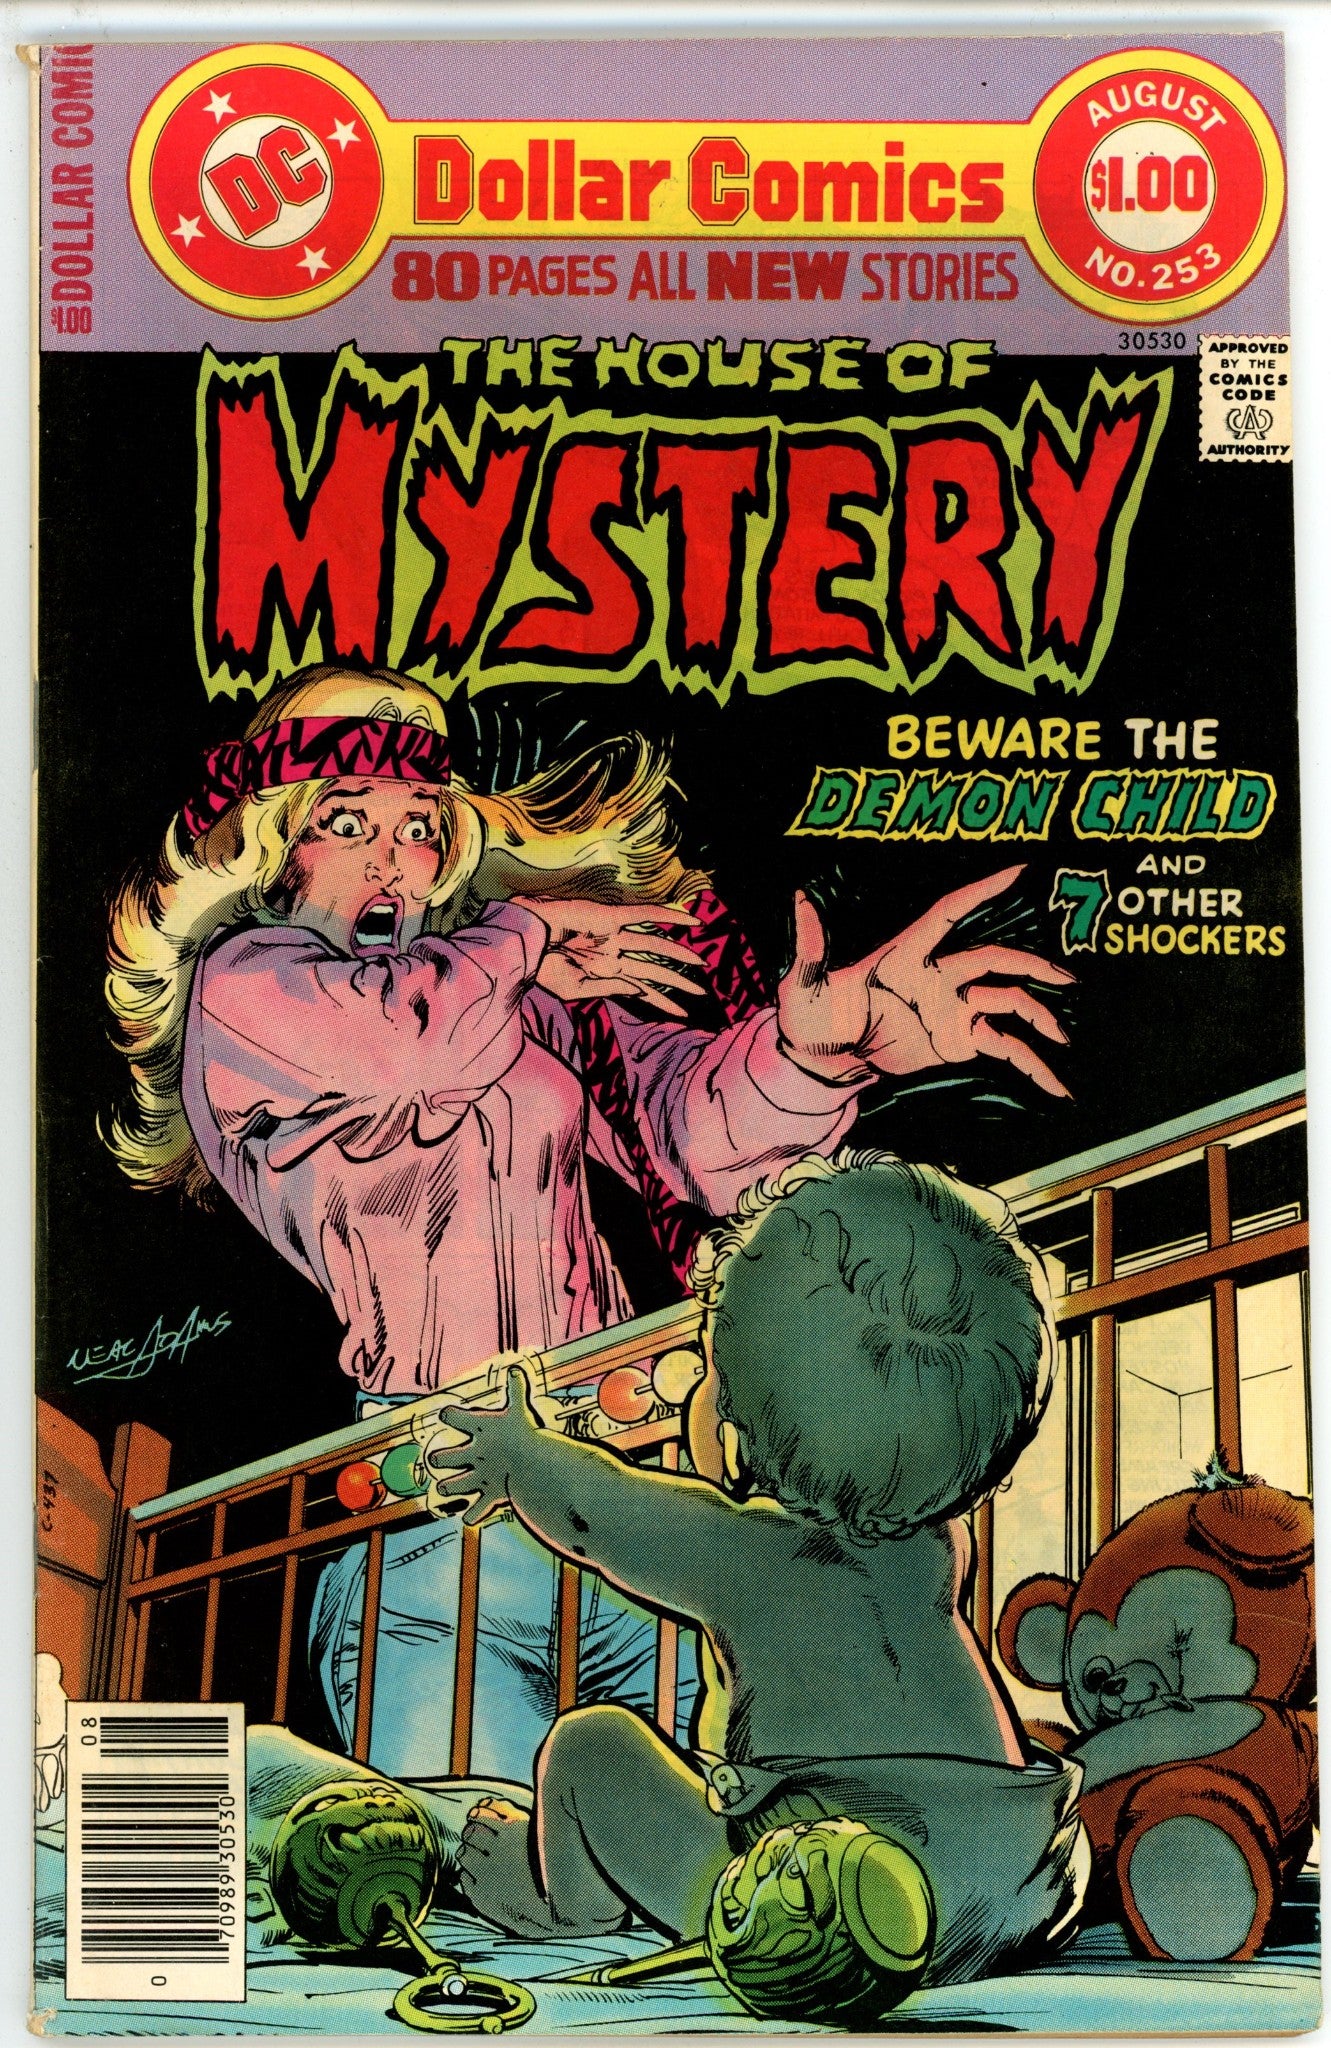 House of Mystery Vol 1 253 VG/FN (5.0) (1977) 